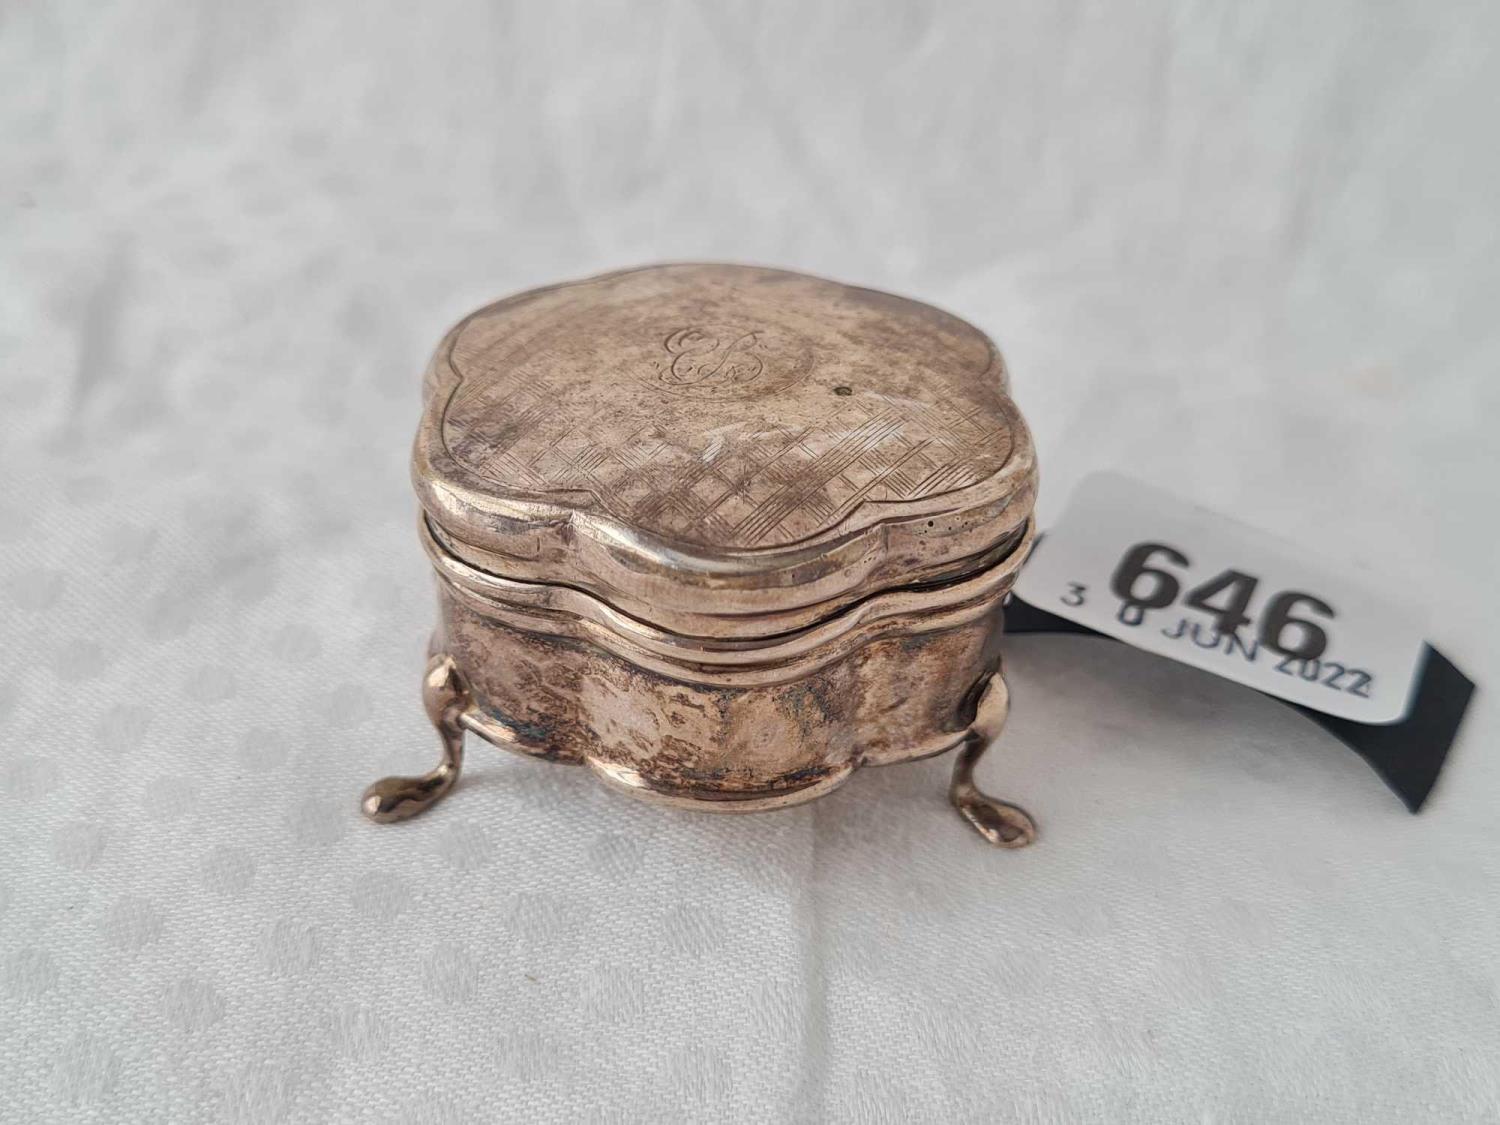 A shaped circular ring box on pad feet – 2” wide - Birmingham 1909 by S & S